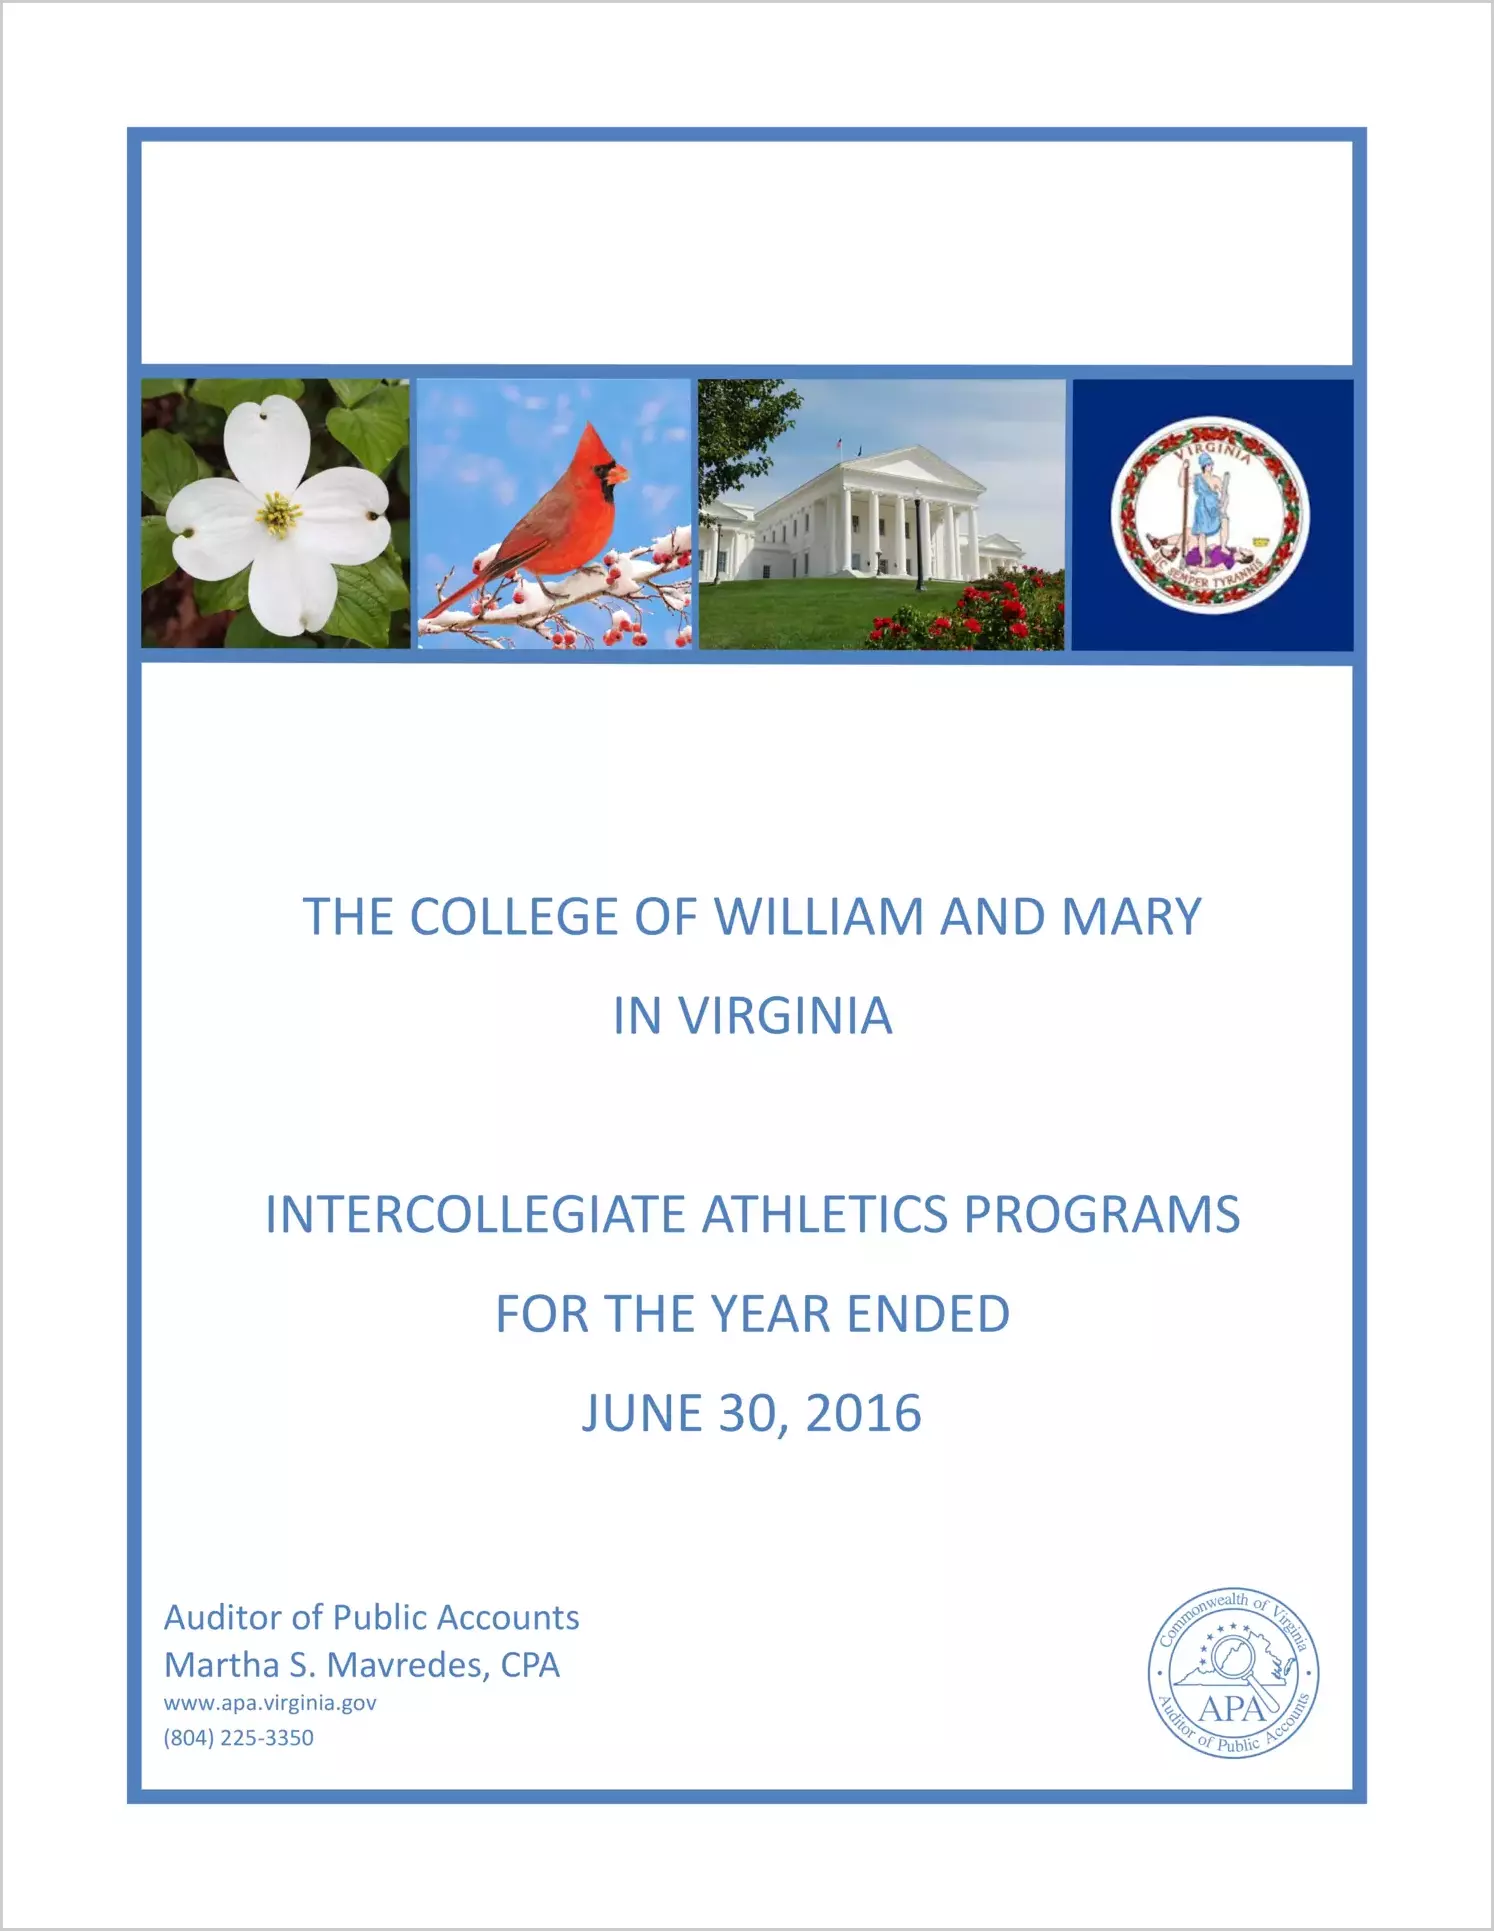 The College of William and Mary in Virginia Intercollegiate Athletics Programs for the year ended June 30, 2016